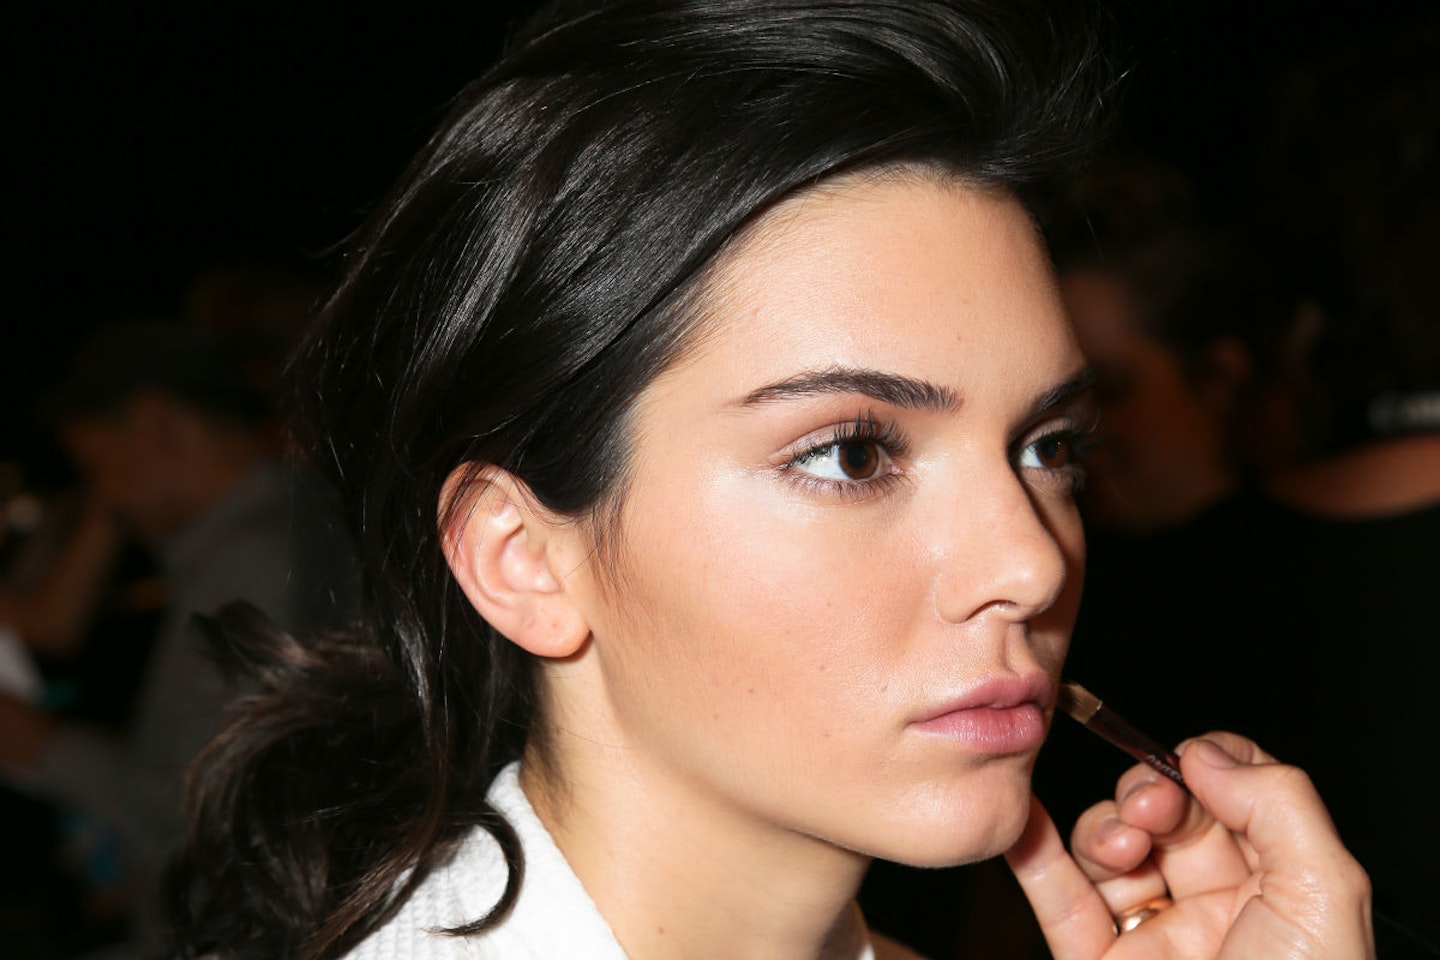 Catwalk queen Kendall has perfected the natural look